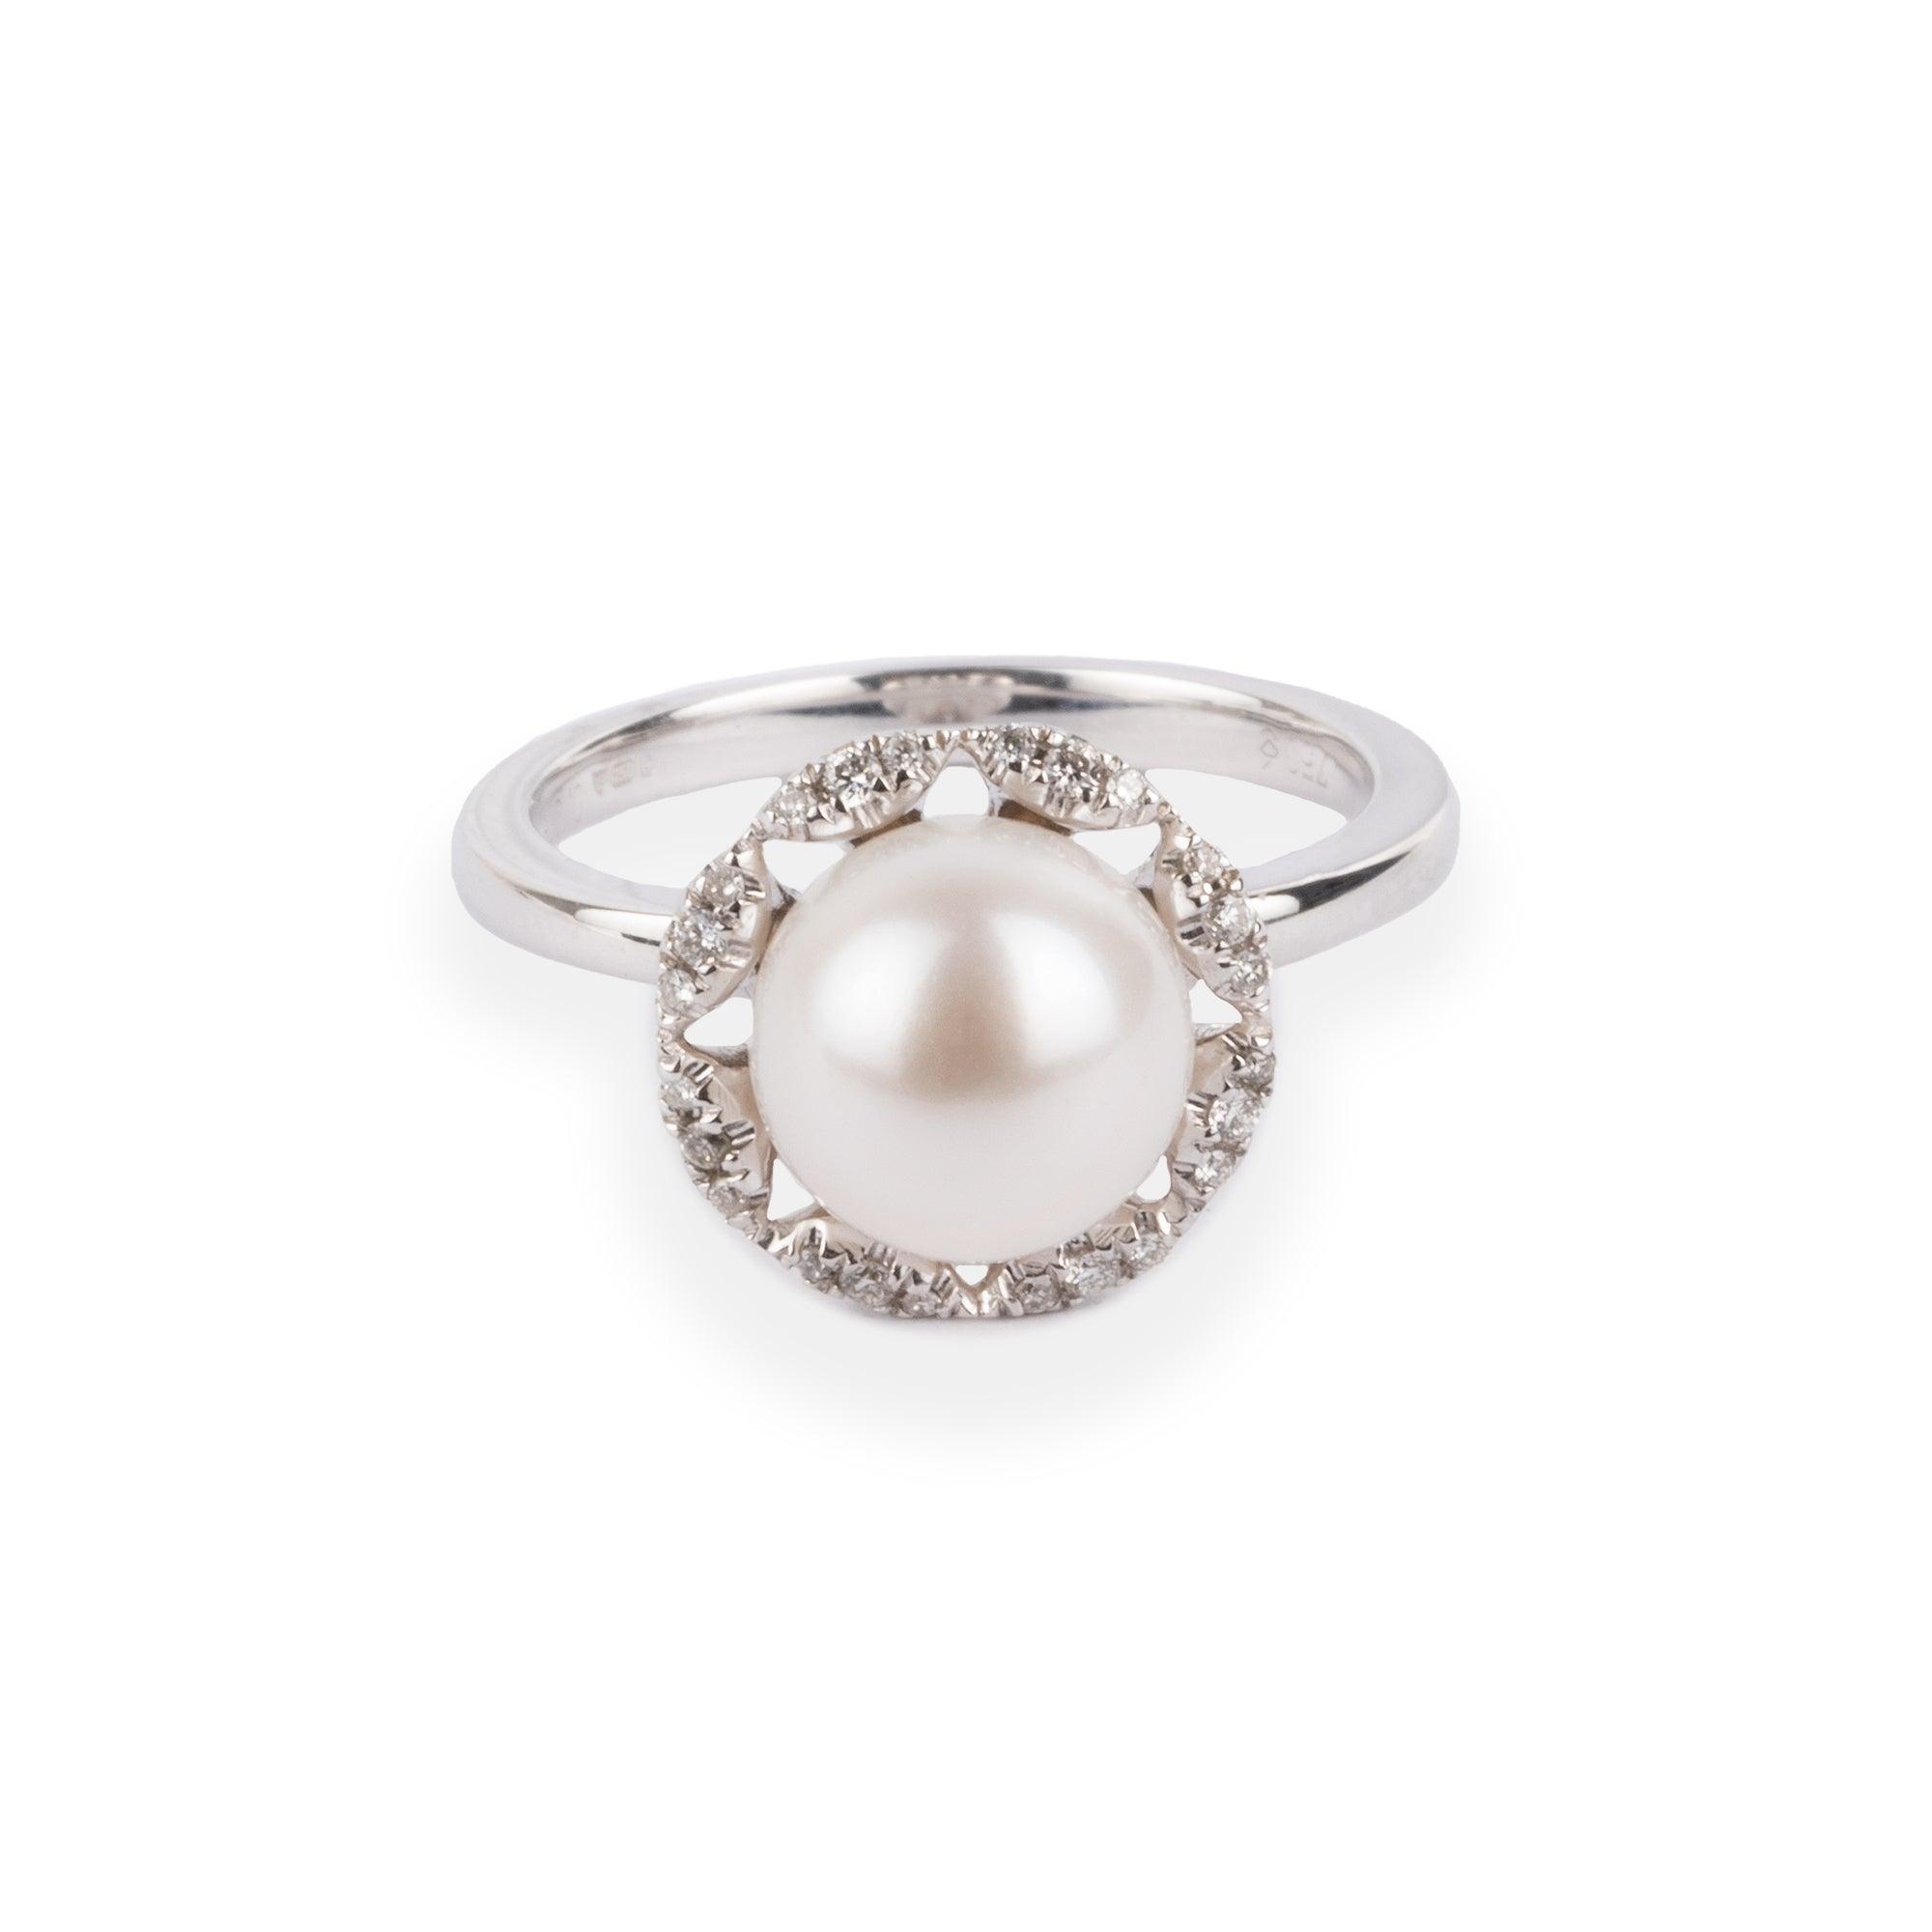 18ct White Gold Diamond & Cultured Pearl Dress Ring A-R41161-3002 - Minar Jewellers